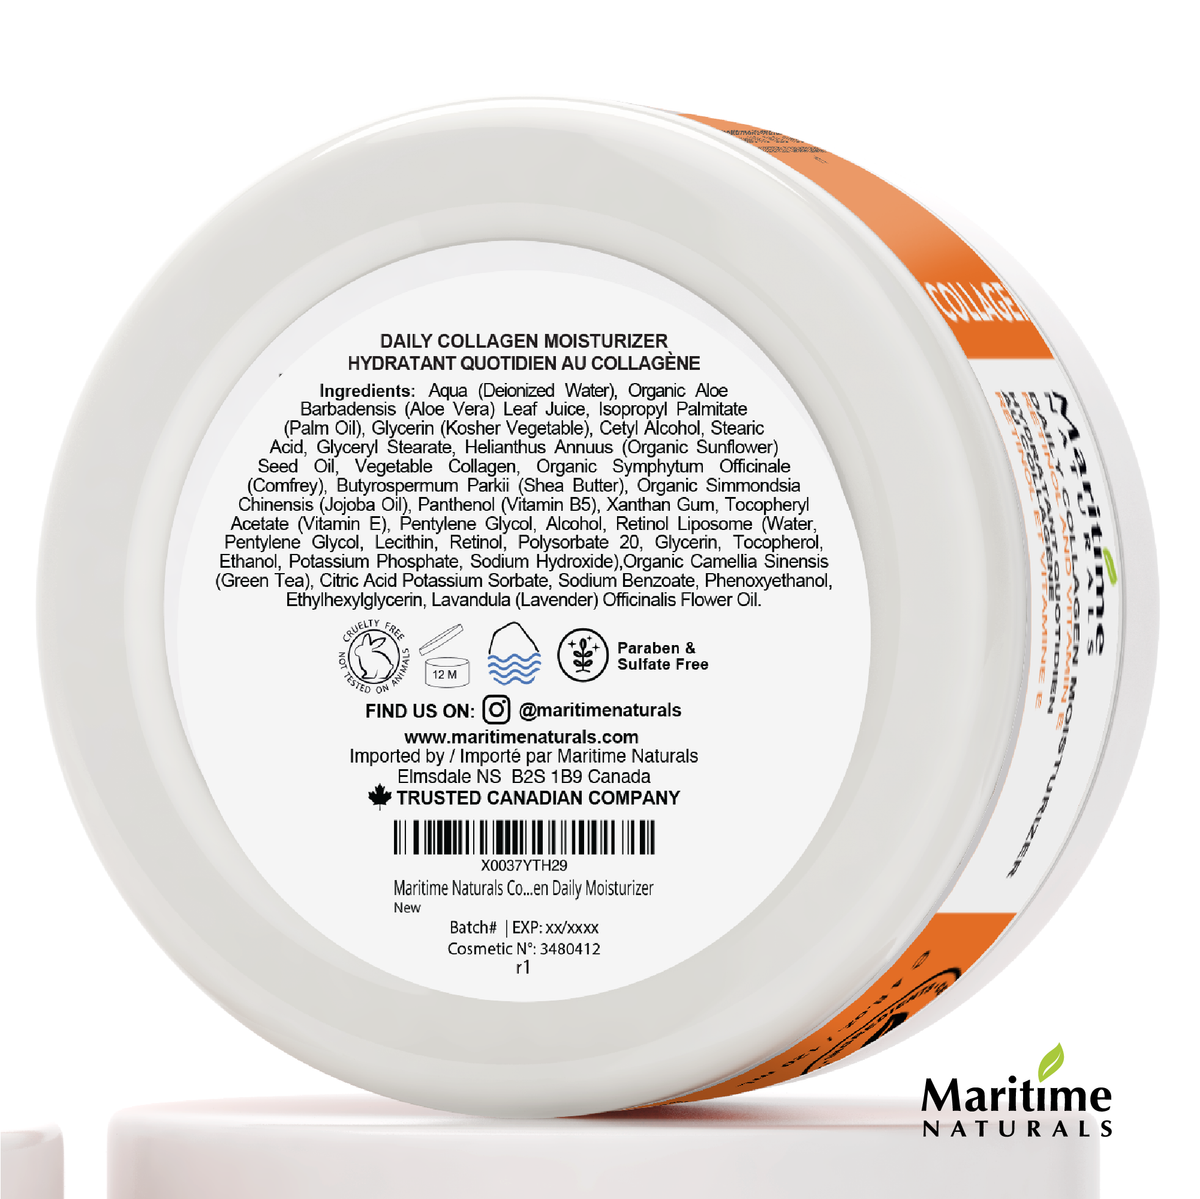 Maritime Naturals Collagen moisturizer for face natural skincare from canada ingredients list